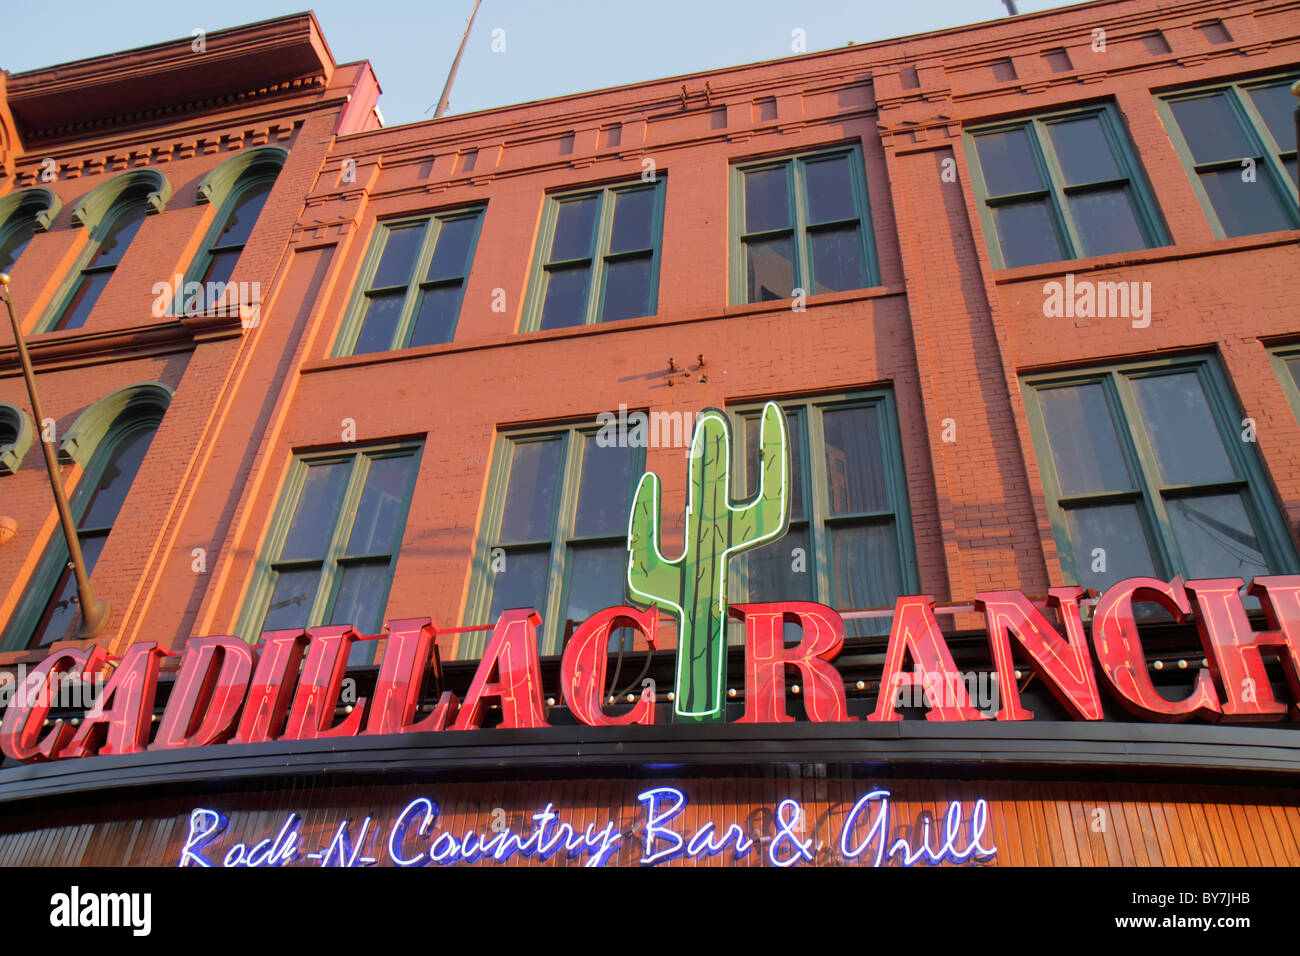 Tennessee Nashville,Music City USA,downtown,Lower Broadway,neon light,sign,Cadillac Ranch,bar lounge pub,grill,restaurant restaurants food dining cafe Stock Photo